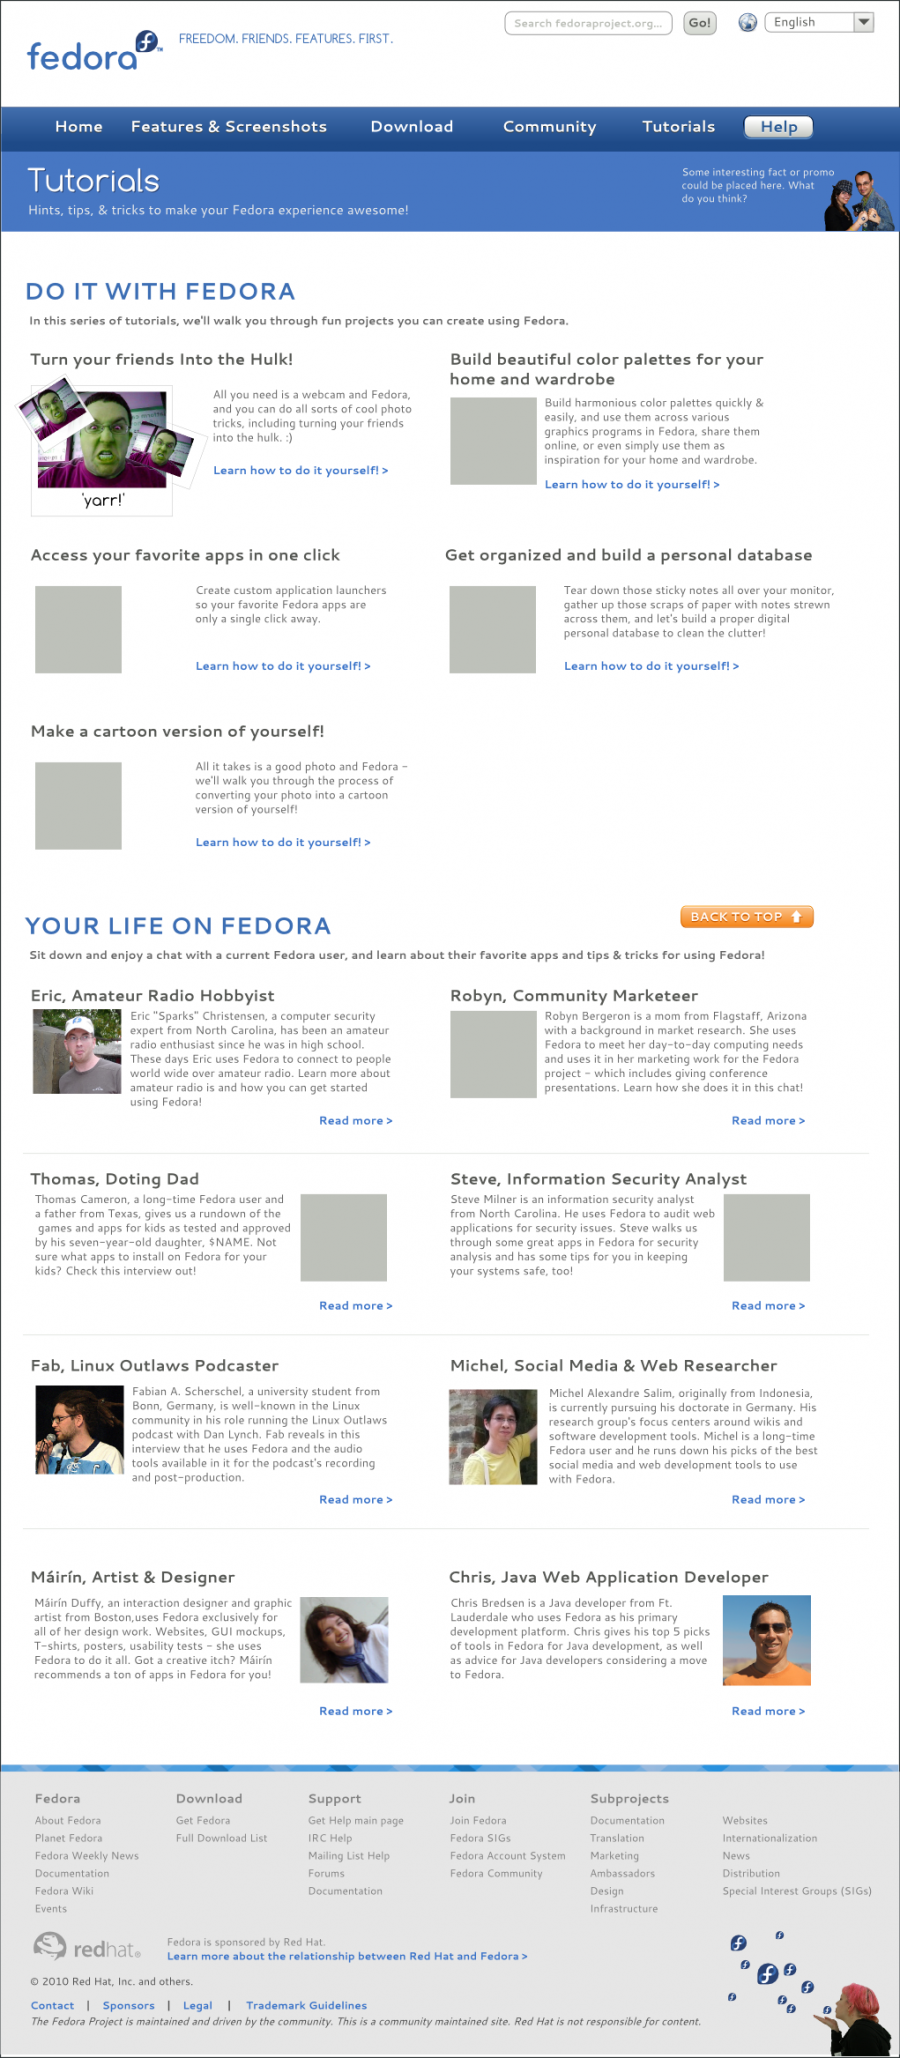 Wwwfpo-redesign-2010 6-tutorials.png